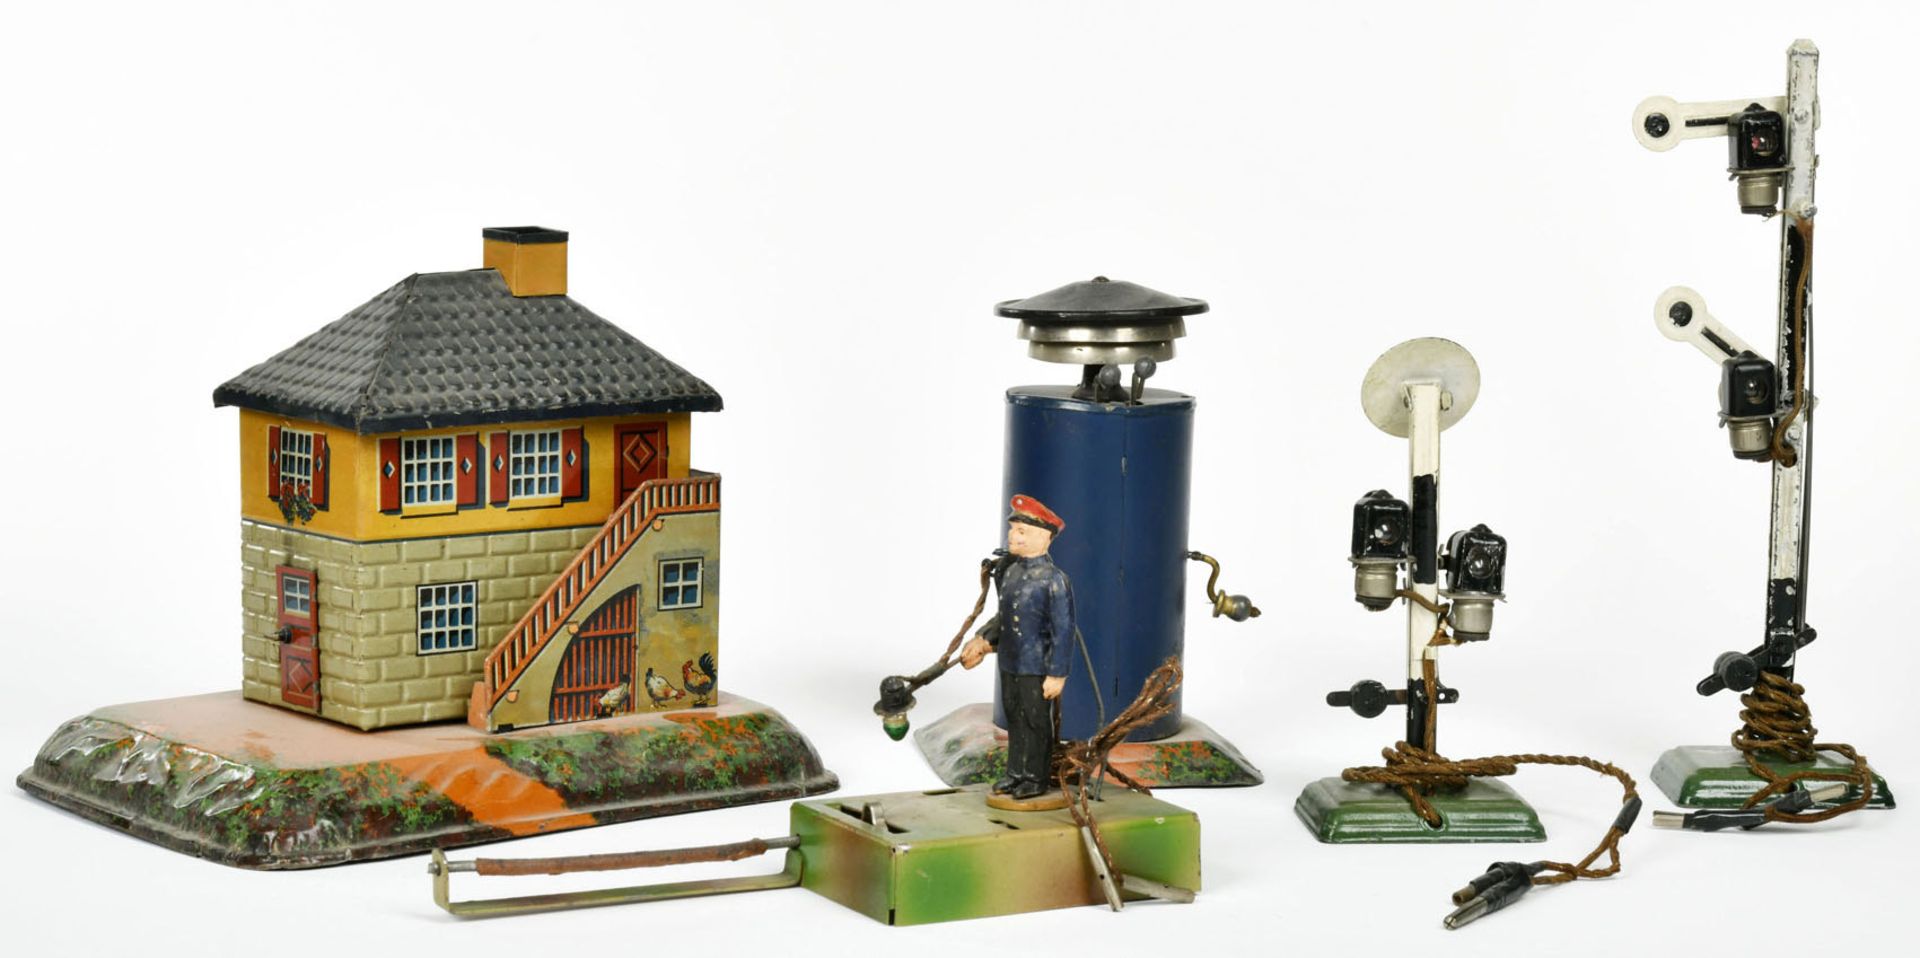 Märklin + Bing, gate keeper's house, signals, signal bell, Germany pw, Spur 0, paint d., please - Image 2 of 3